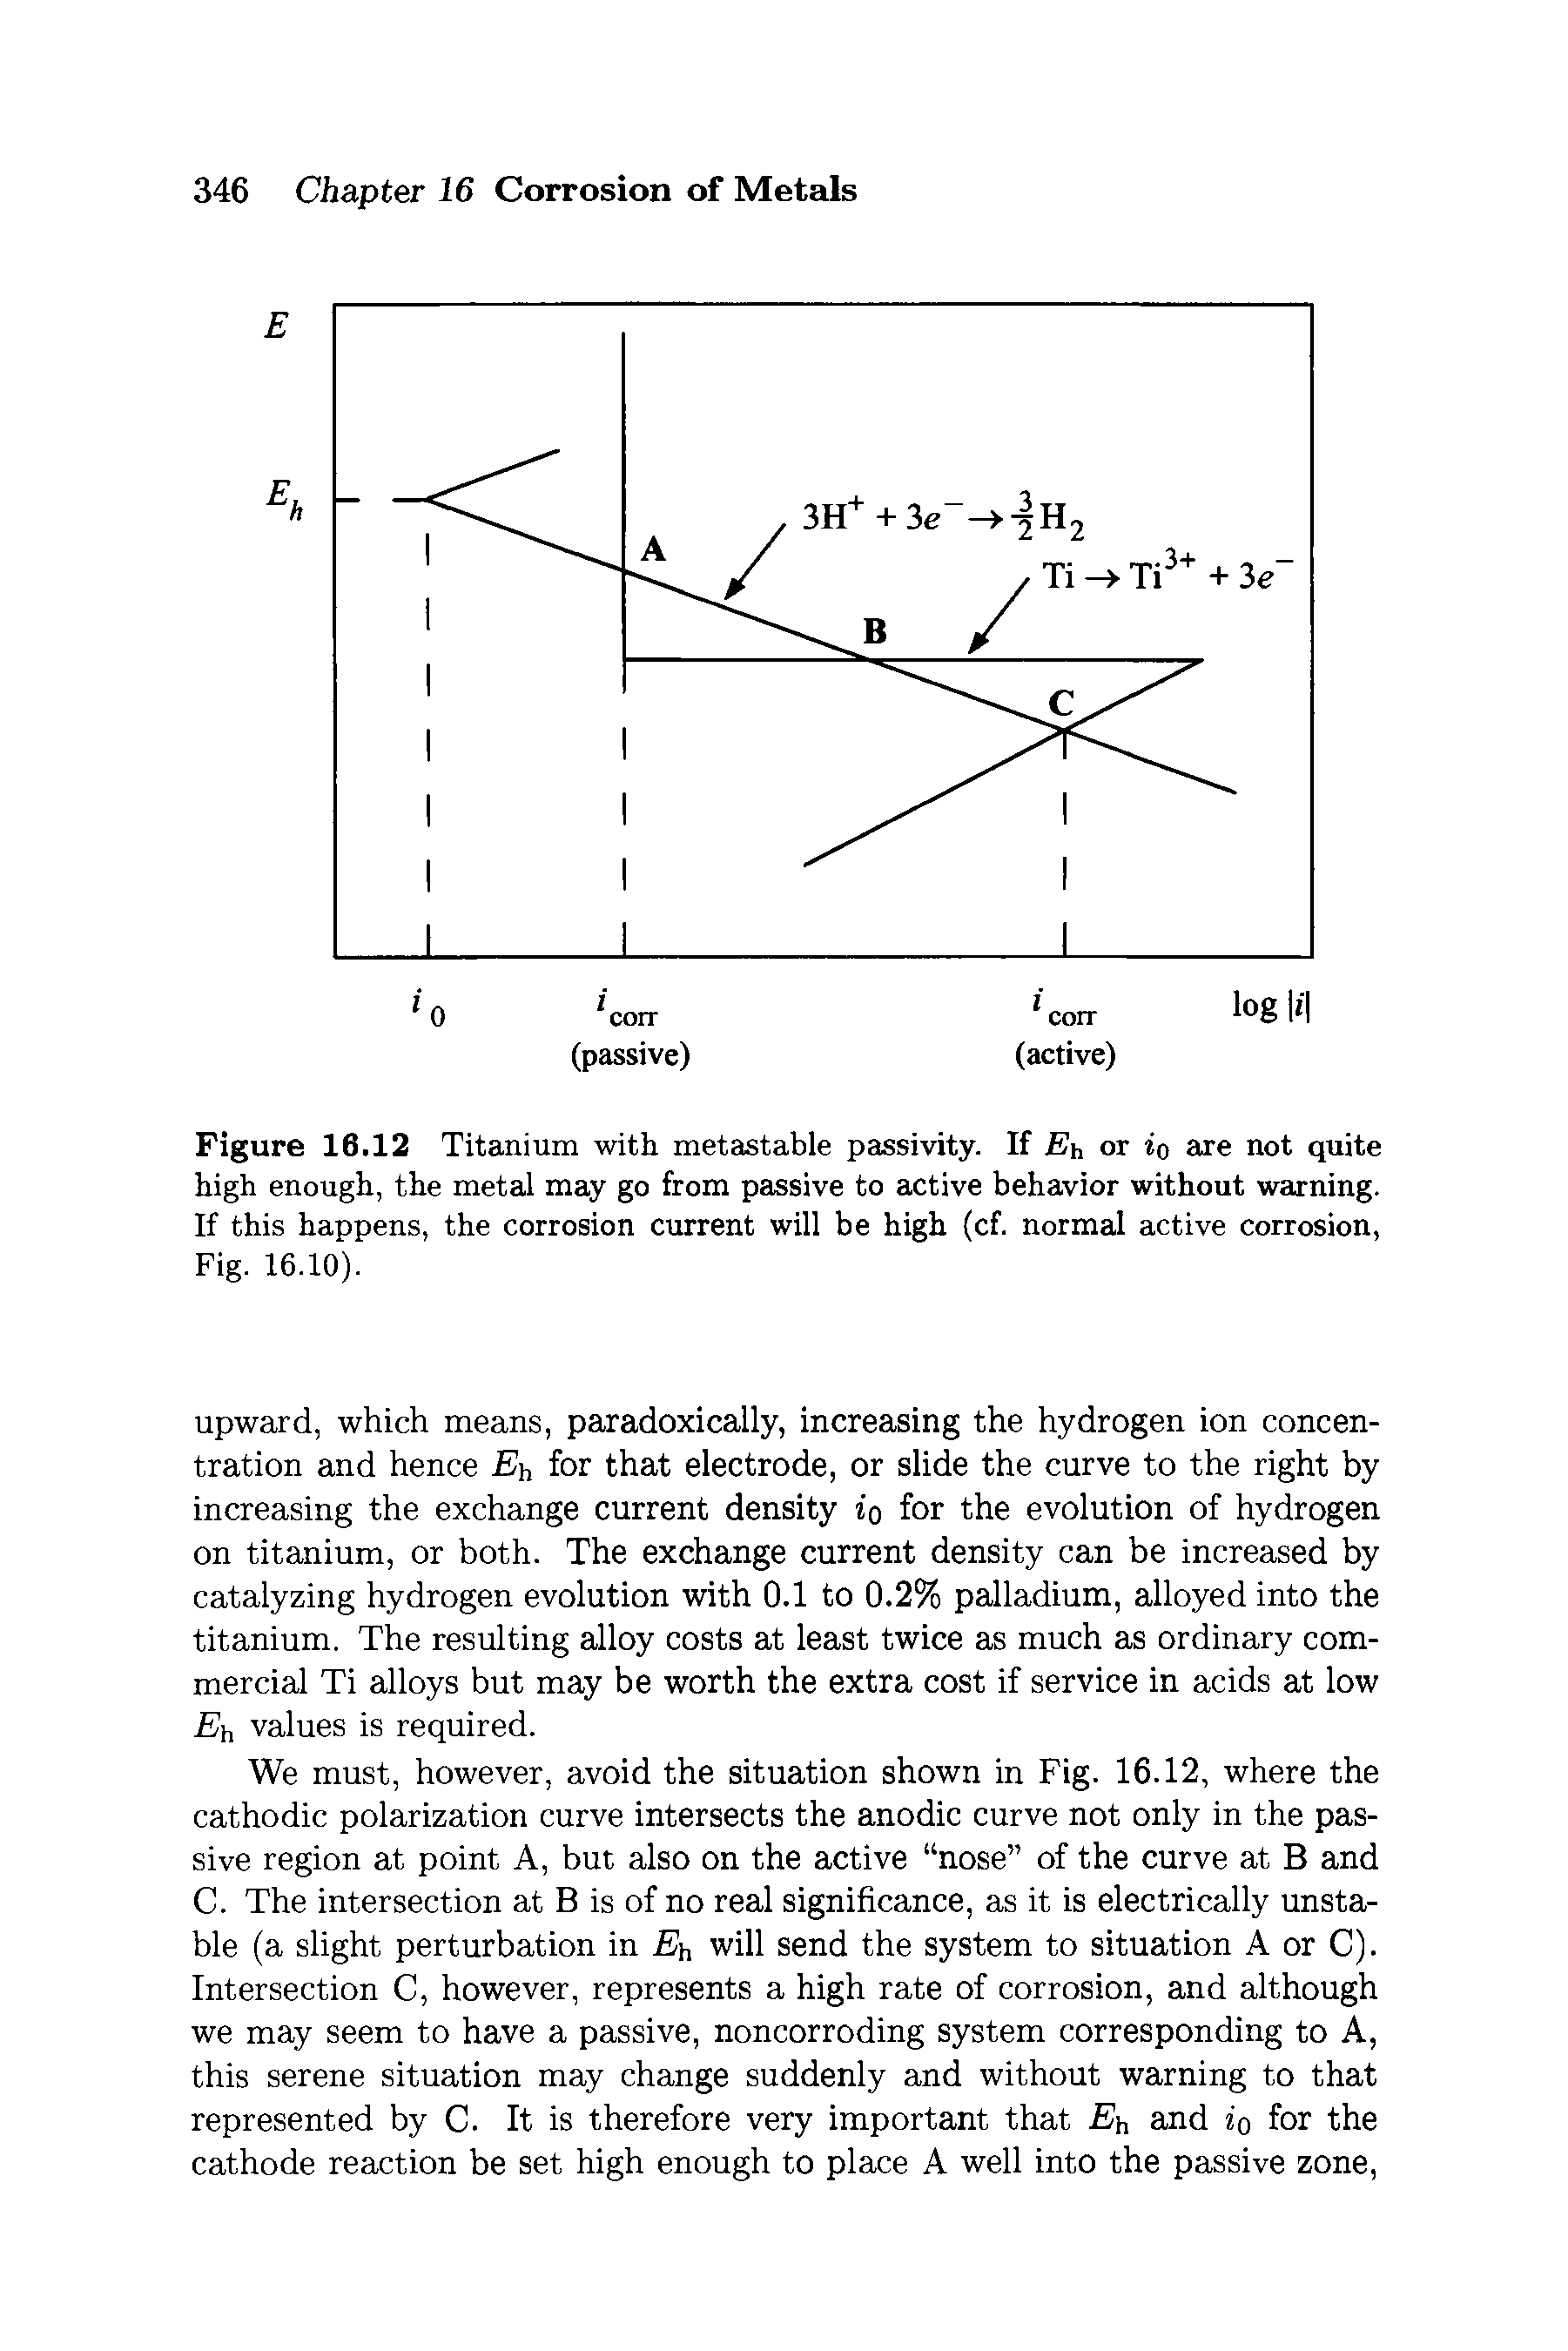 Figure 16.12 Titanium with metastable passivity. If Eh or io are not quite high enough, the metal may go from passive to active behavior without warning. If this happens, the corrosion current will be high (cf. normal active corrosion, Fig. 16.10).